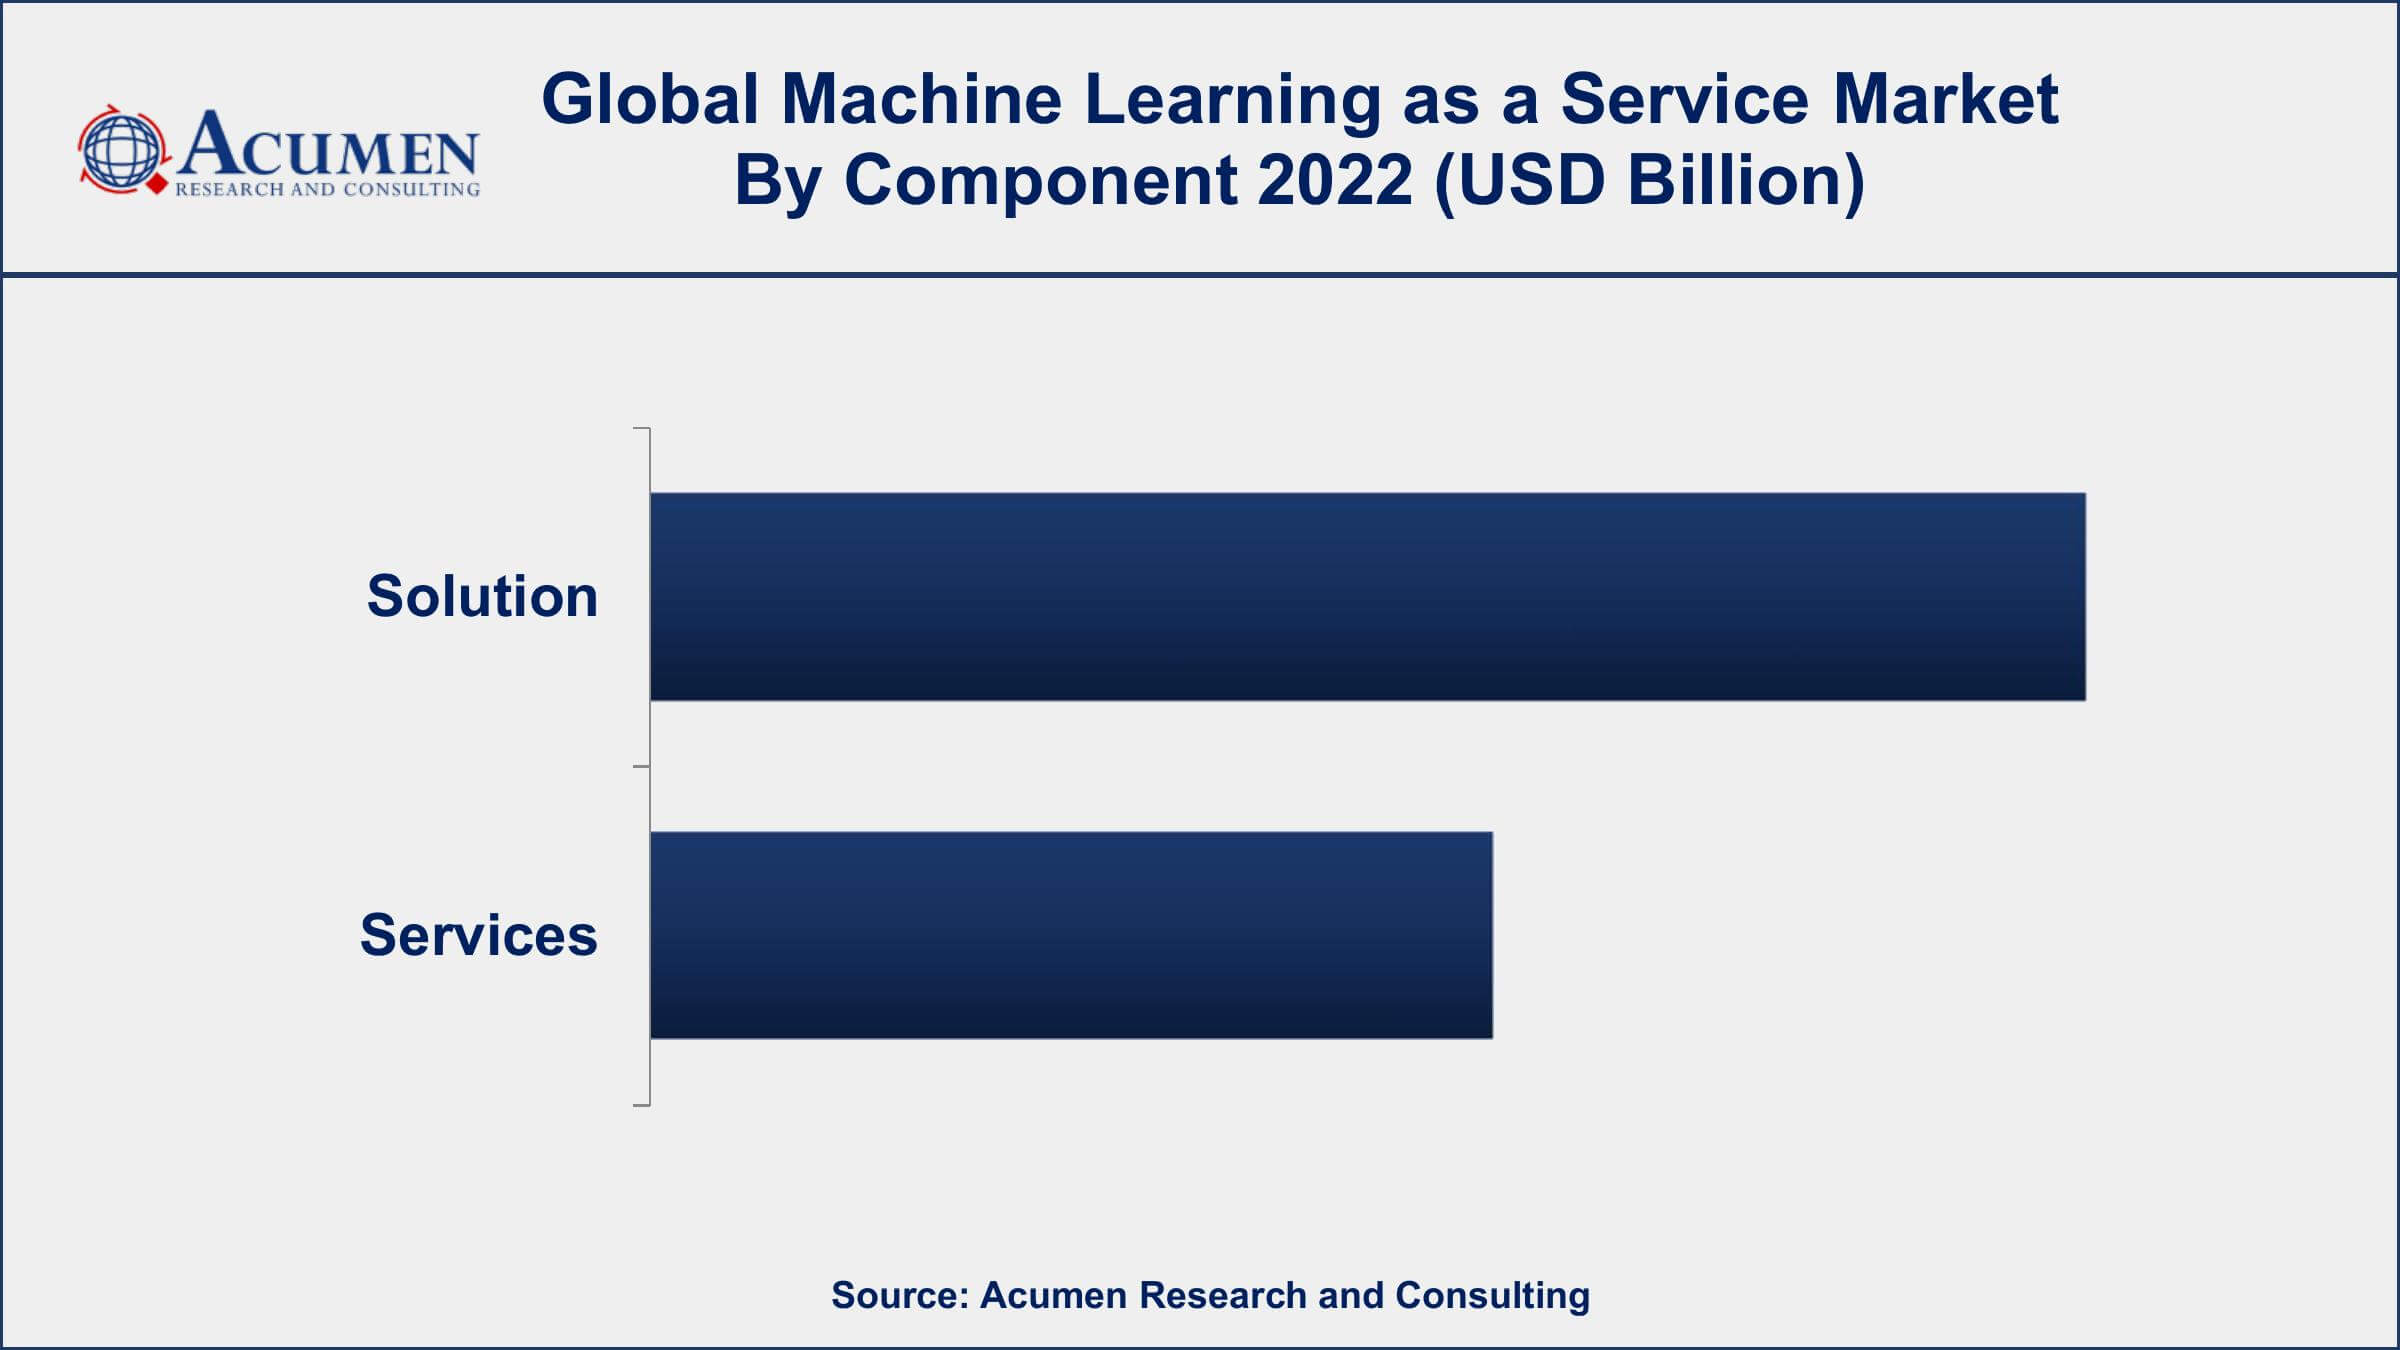 Machine Learning as a Service Market Drivers